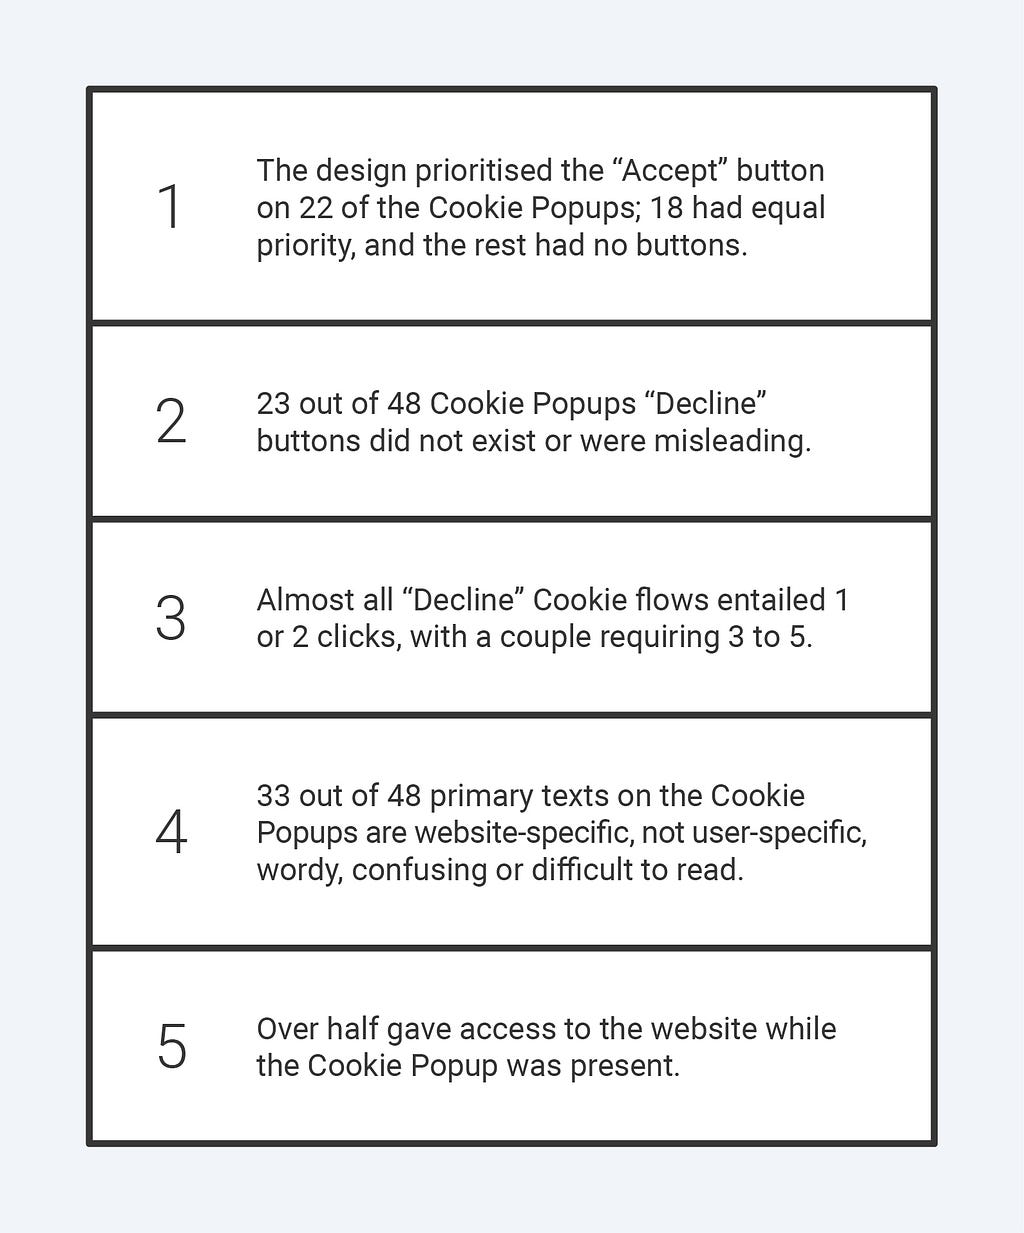 The design prioritised the “Accept” button on 22 of the Cookie Popups; 18 Had equal priority, and the rest had no buttons. In 23 out of 48 Cookie Popups, the “Decline” button did not exist or was misleading. Almost all “Decline” Cookie flows entailed 1 or 2 clicks, with a couple requiring 3 to 5. 33 out of 48 primary texts on the Cookie Popups are website-specific, not user-specific, word, confusing or difficult to read. Over half gave access to the website while the Cookie Popup was present.